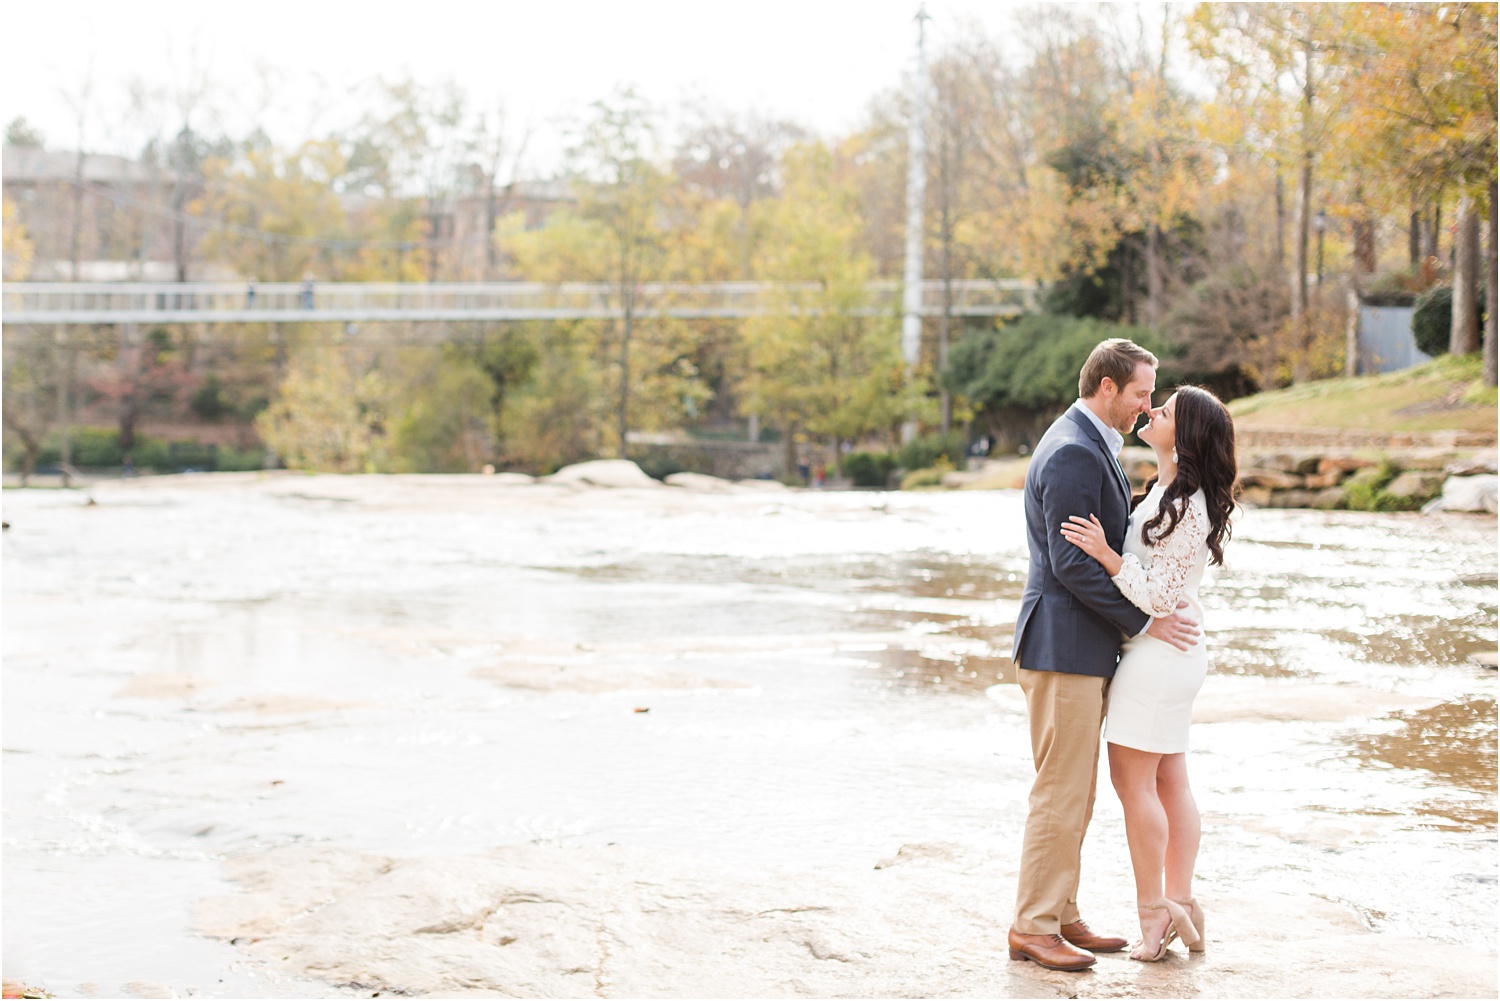 The Falls in Falls Park Engagement